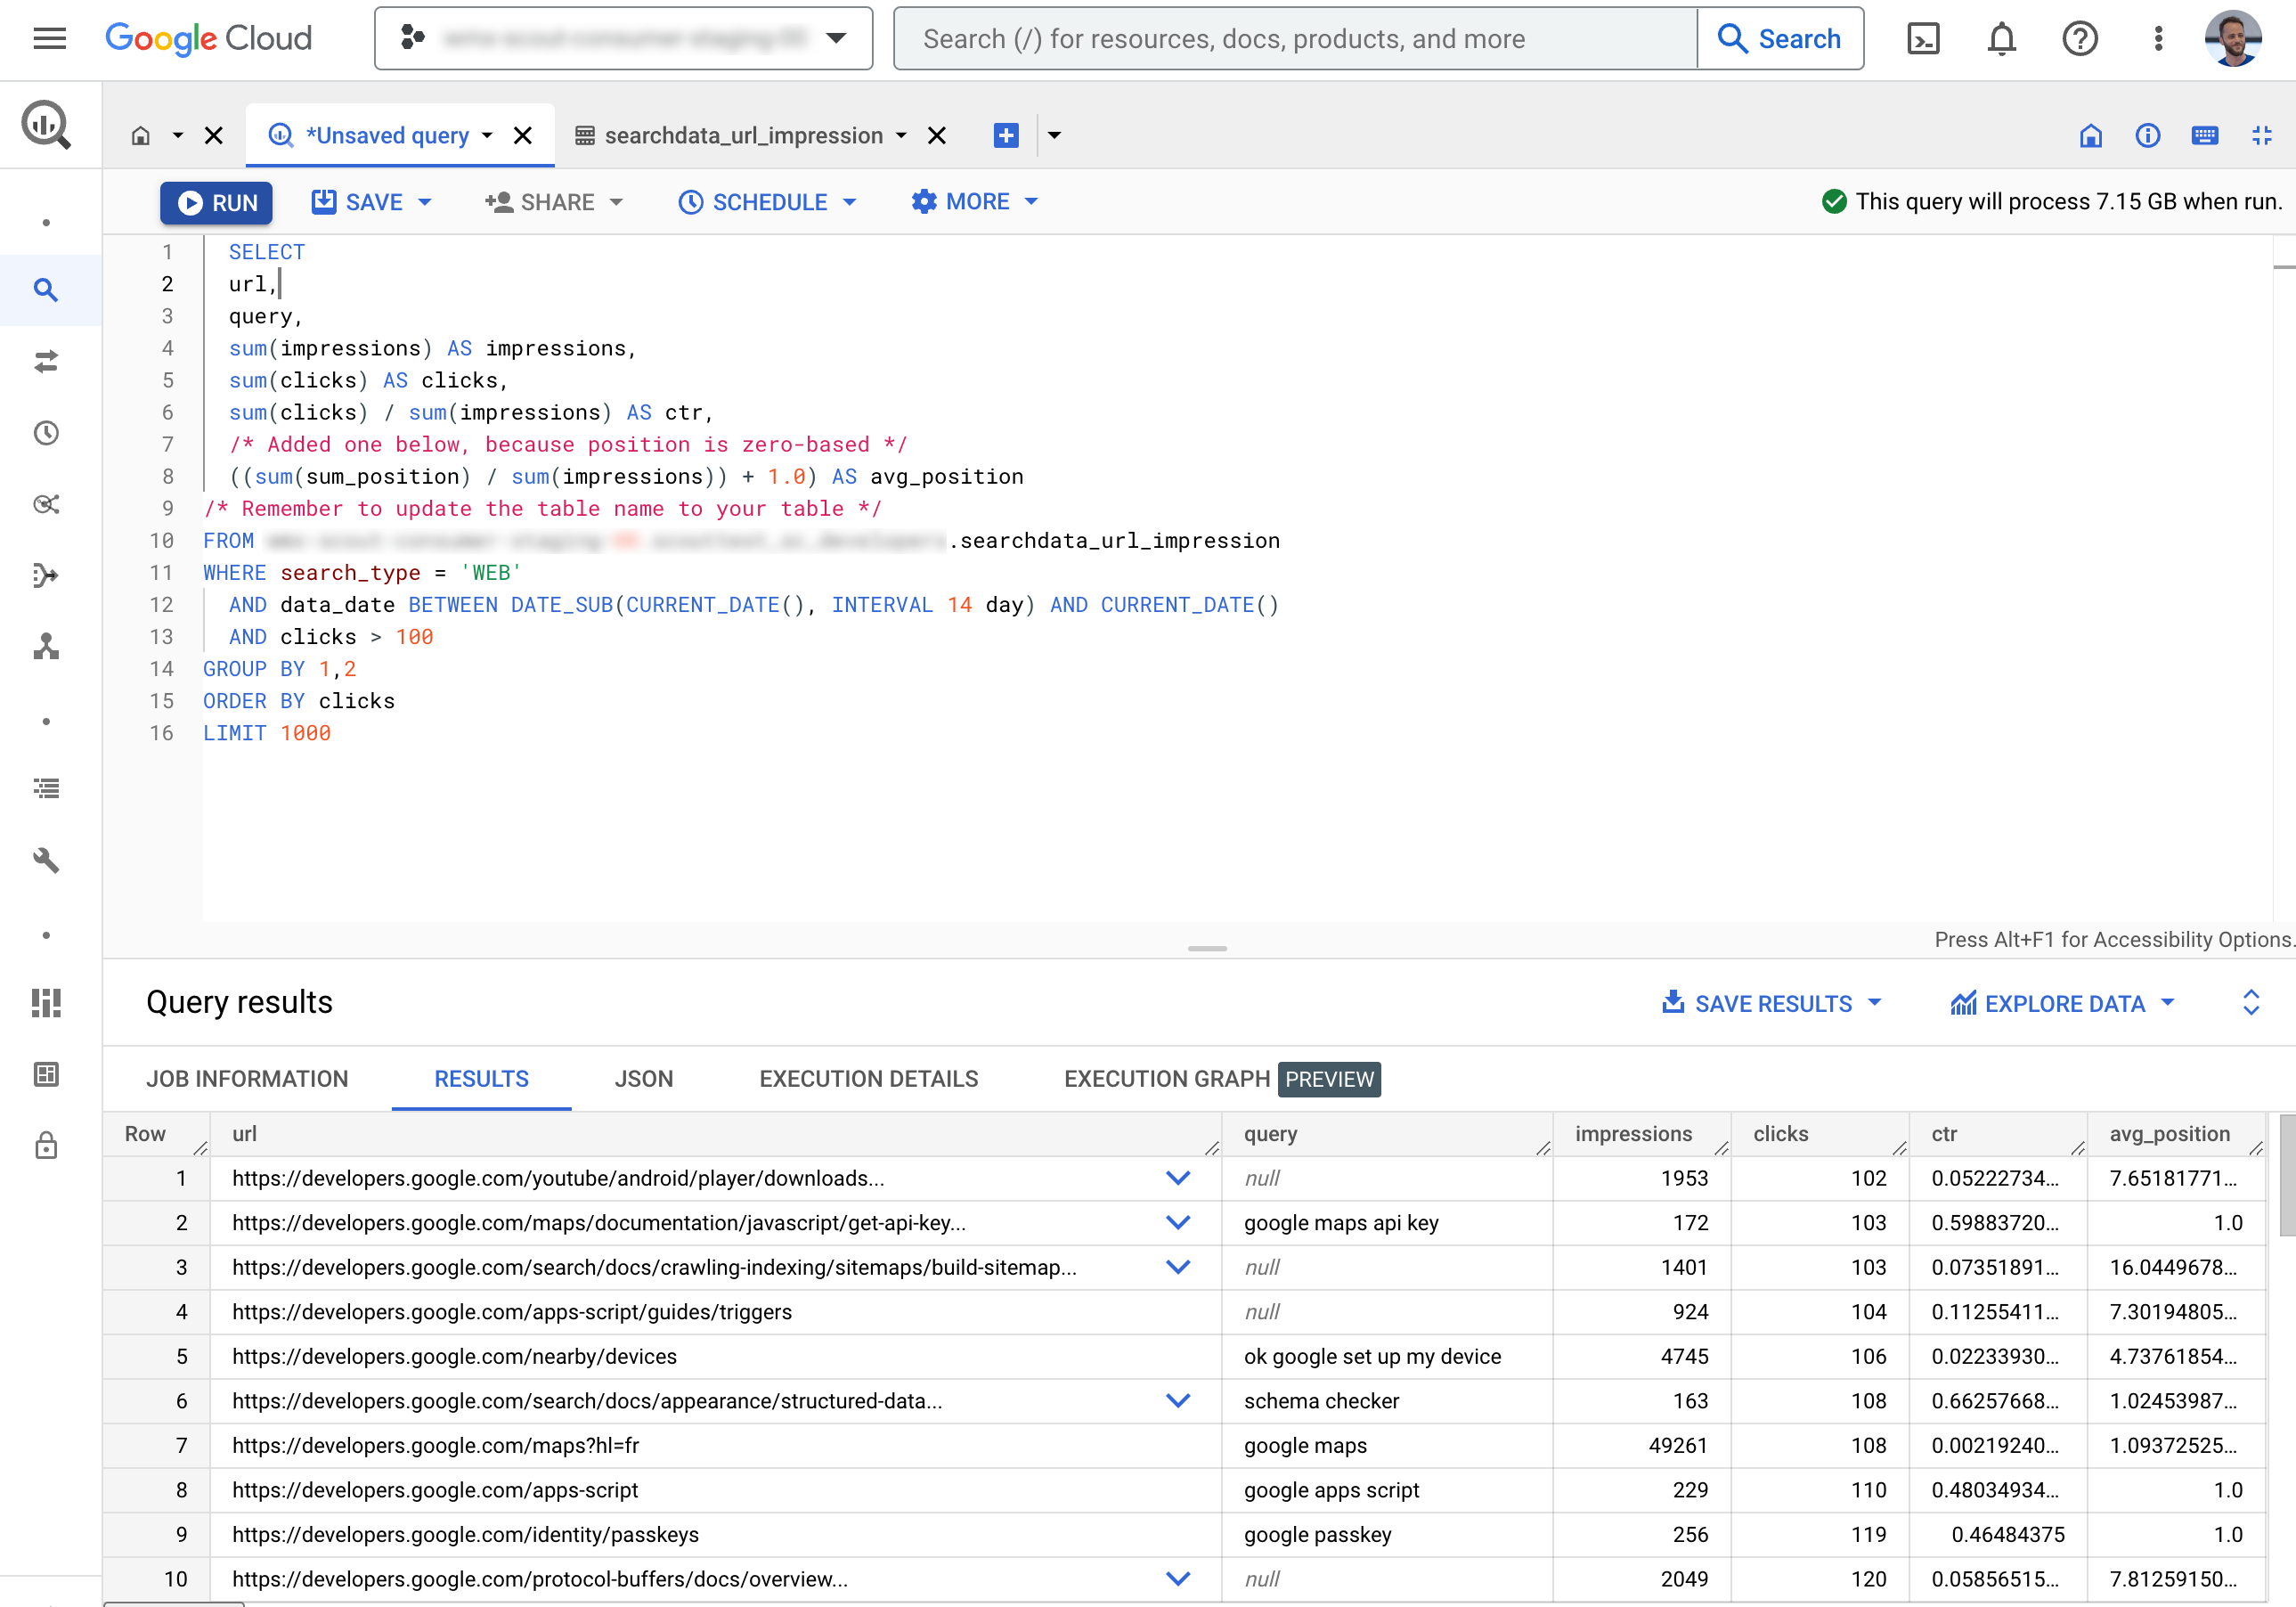 Bulk data export table shown in the BigQuery interface